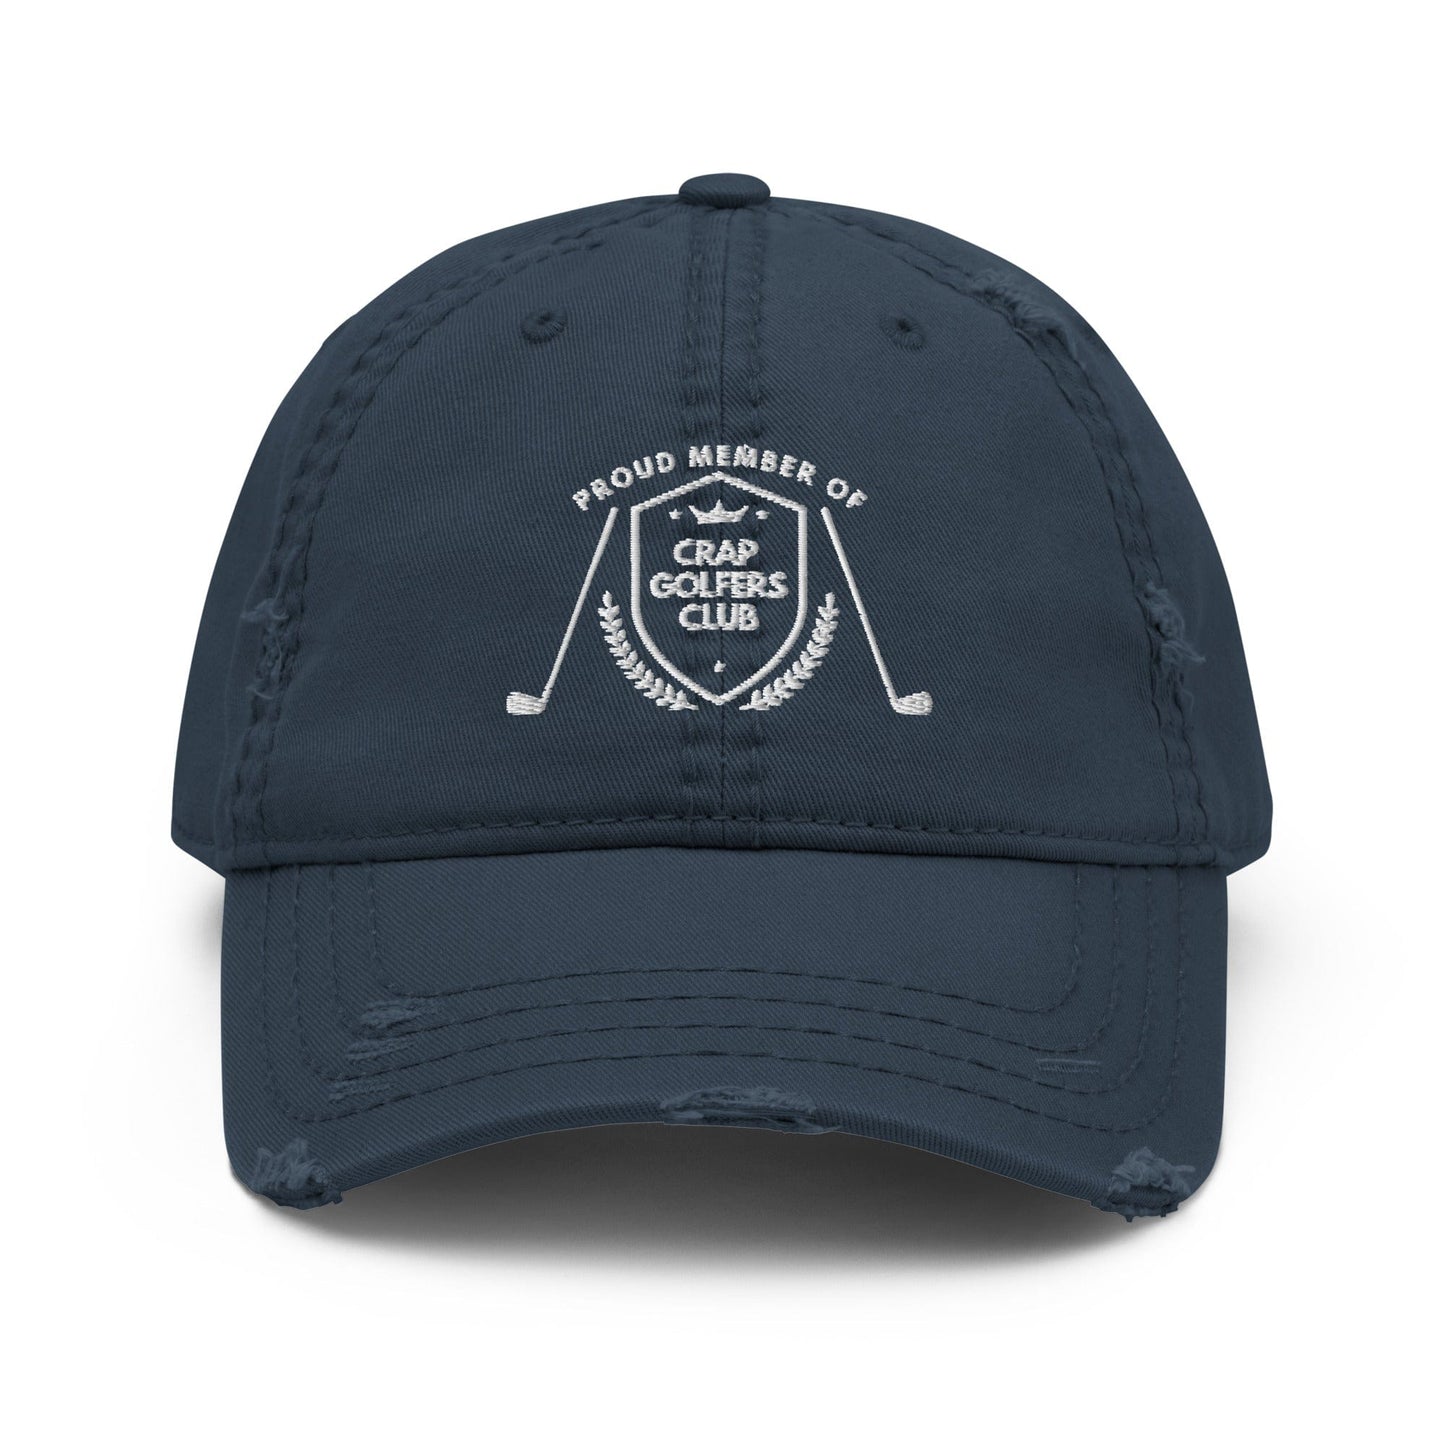 Funny Golfer Gifts  Distressed Cap Navy Crap Golfers Club Distressed Hat